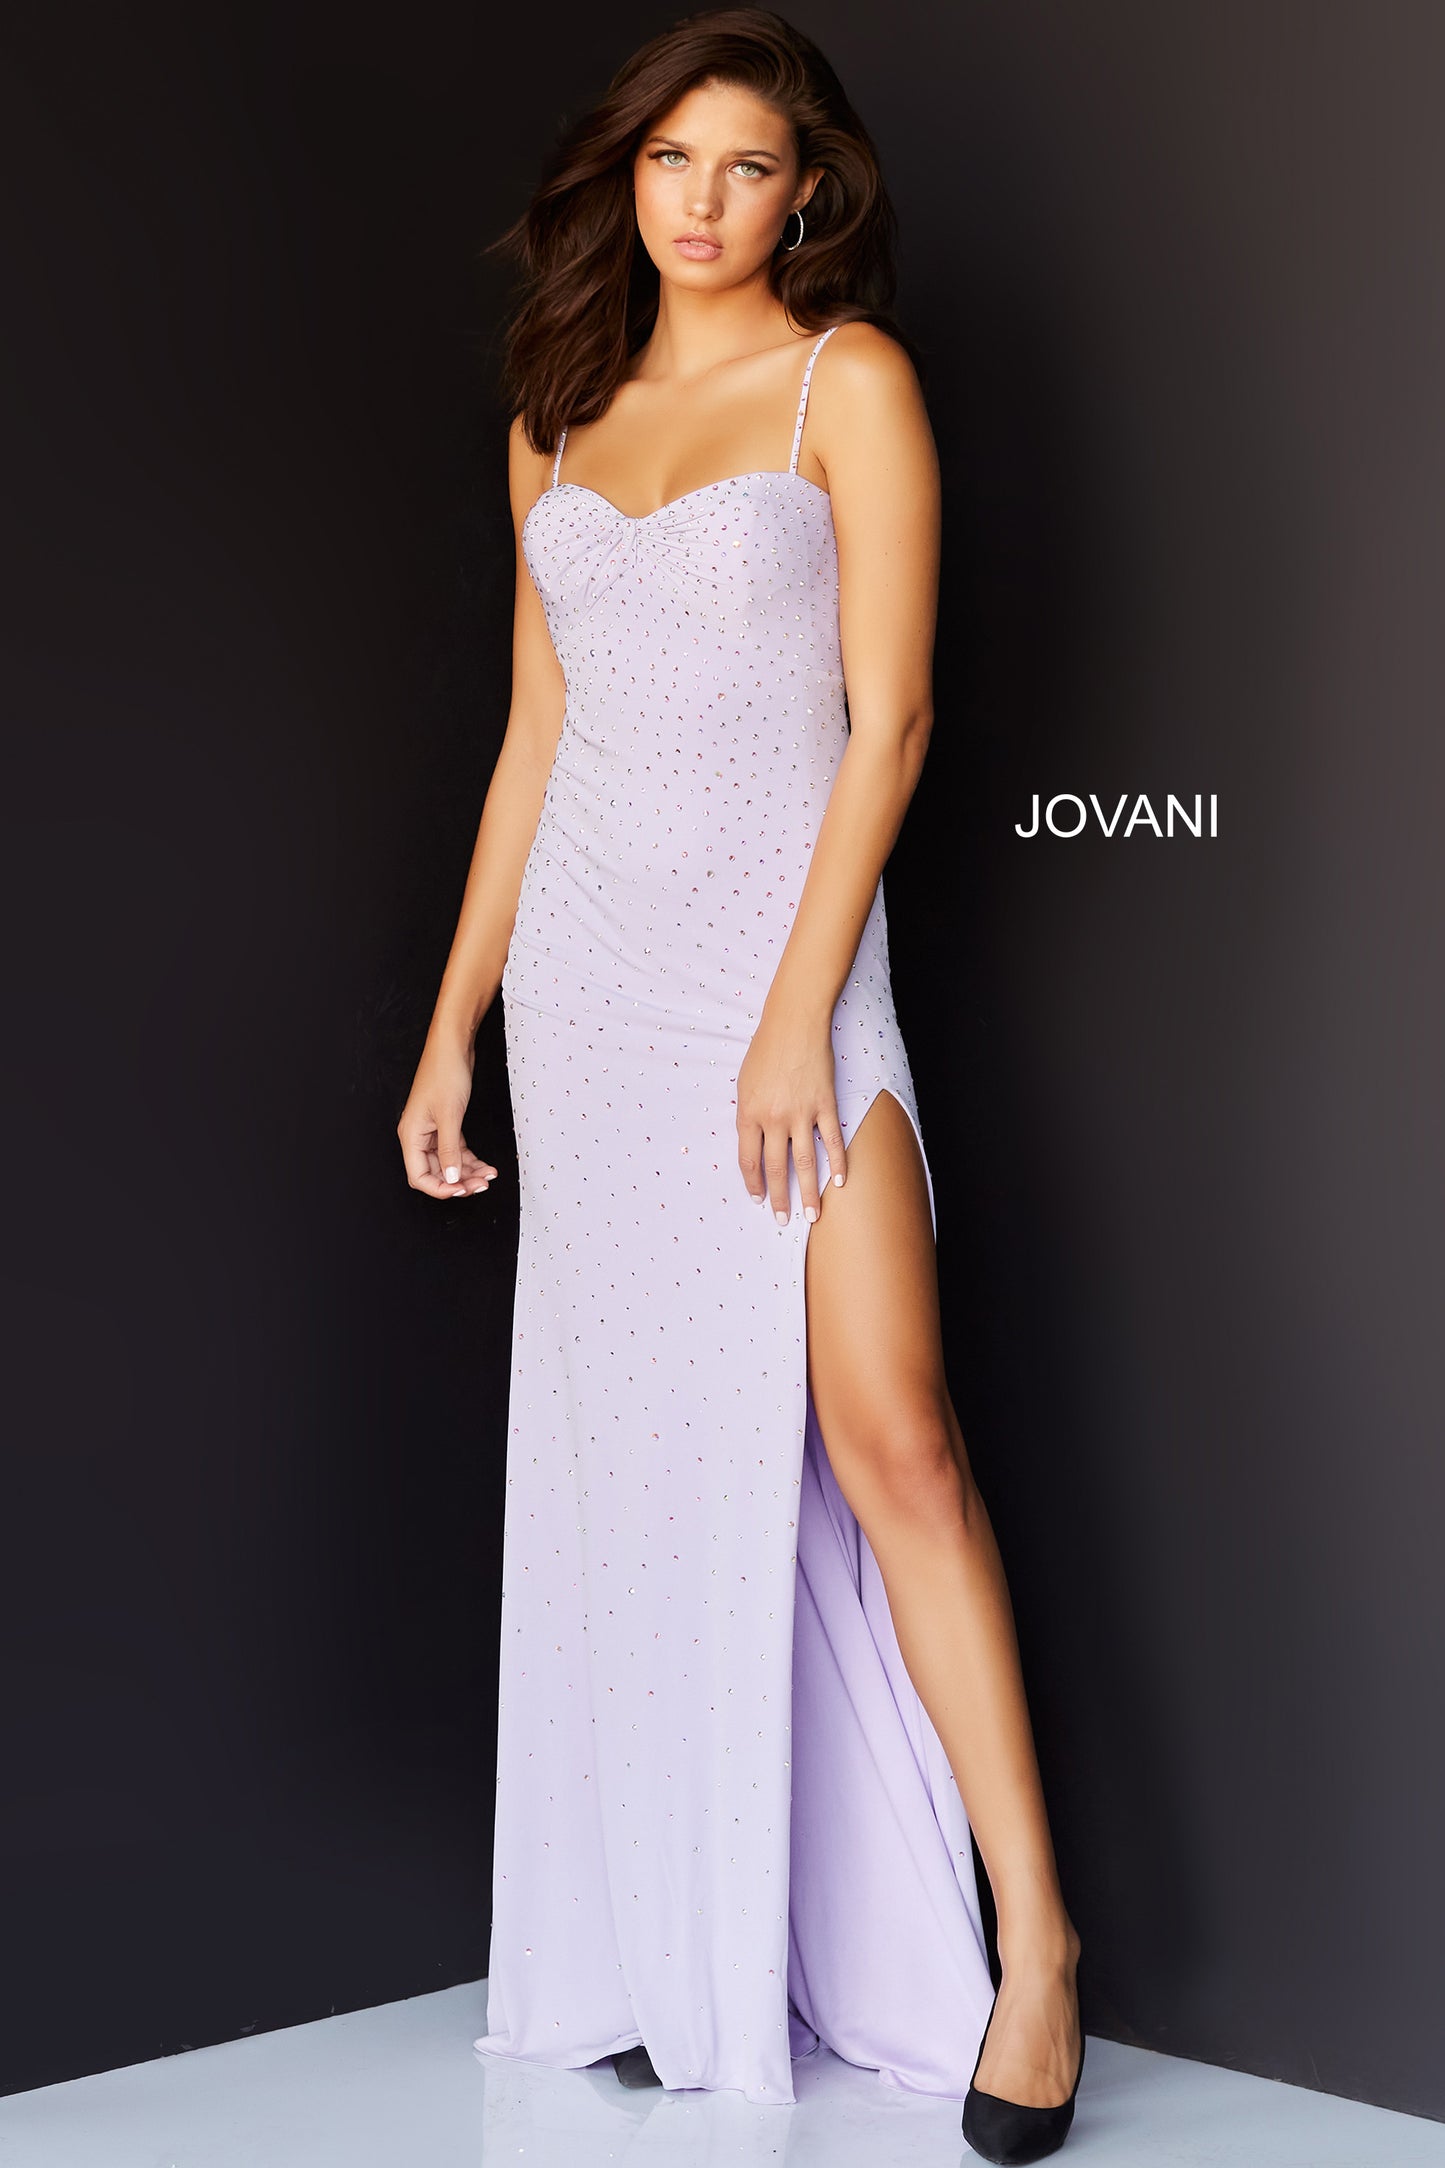 Jovani 06502 Floor length form fitting lilac beaded jersey Jovani prom dress 06502 with high slit features ruched twisted bust, spaghetti strap sweetheart neckline.